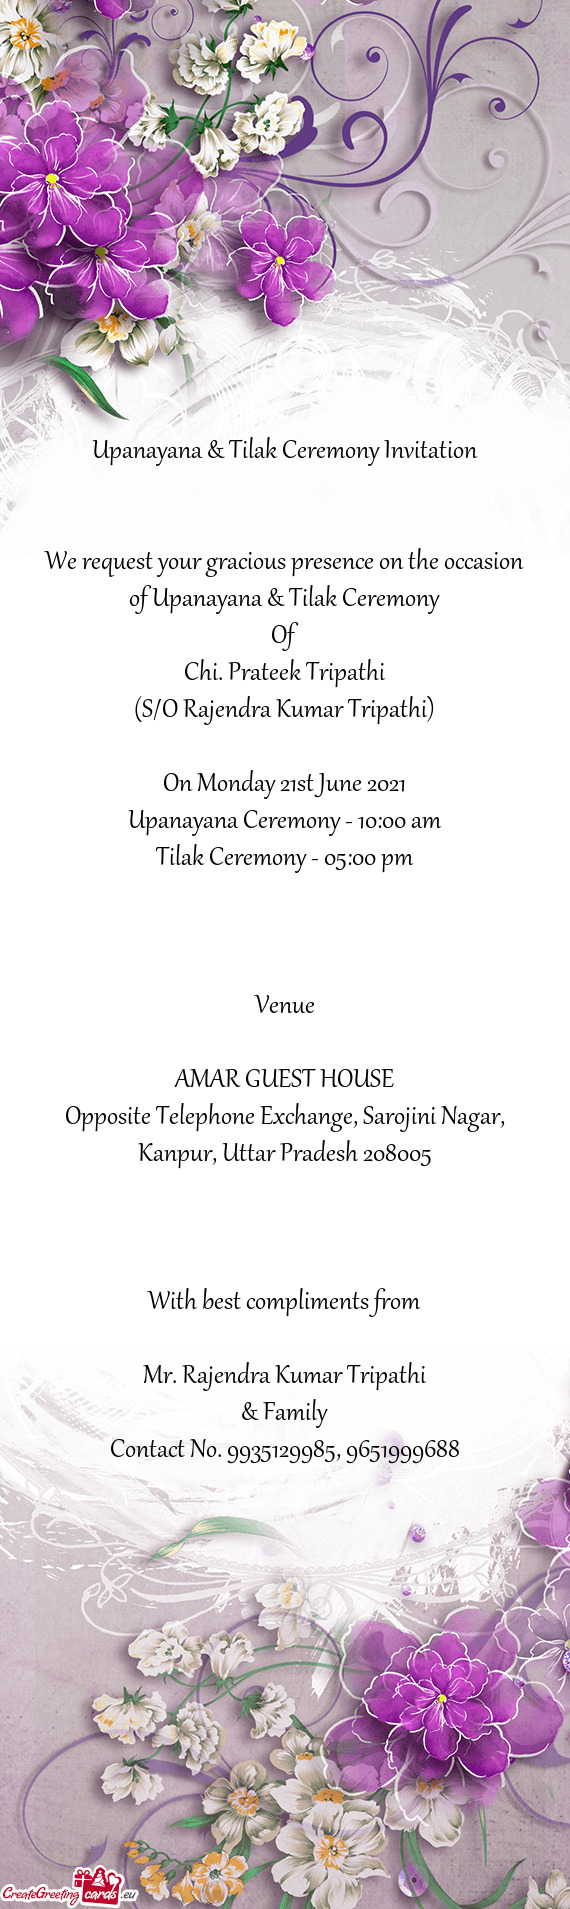 We request your gracious presence on the occasion of Upanayana & Tilak Ceremony